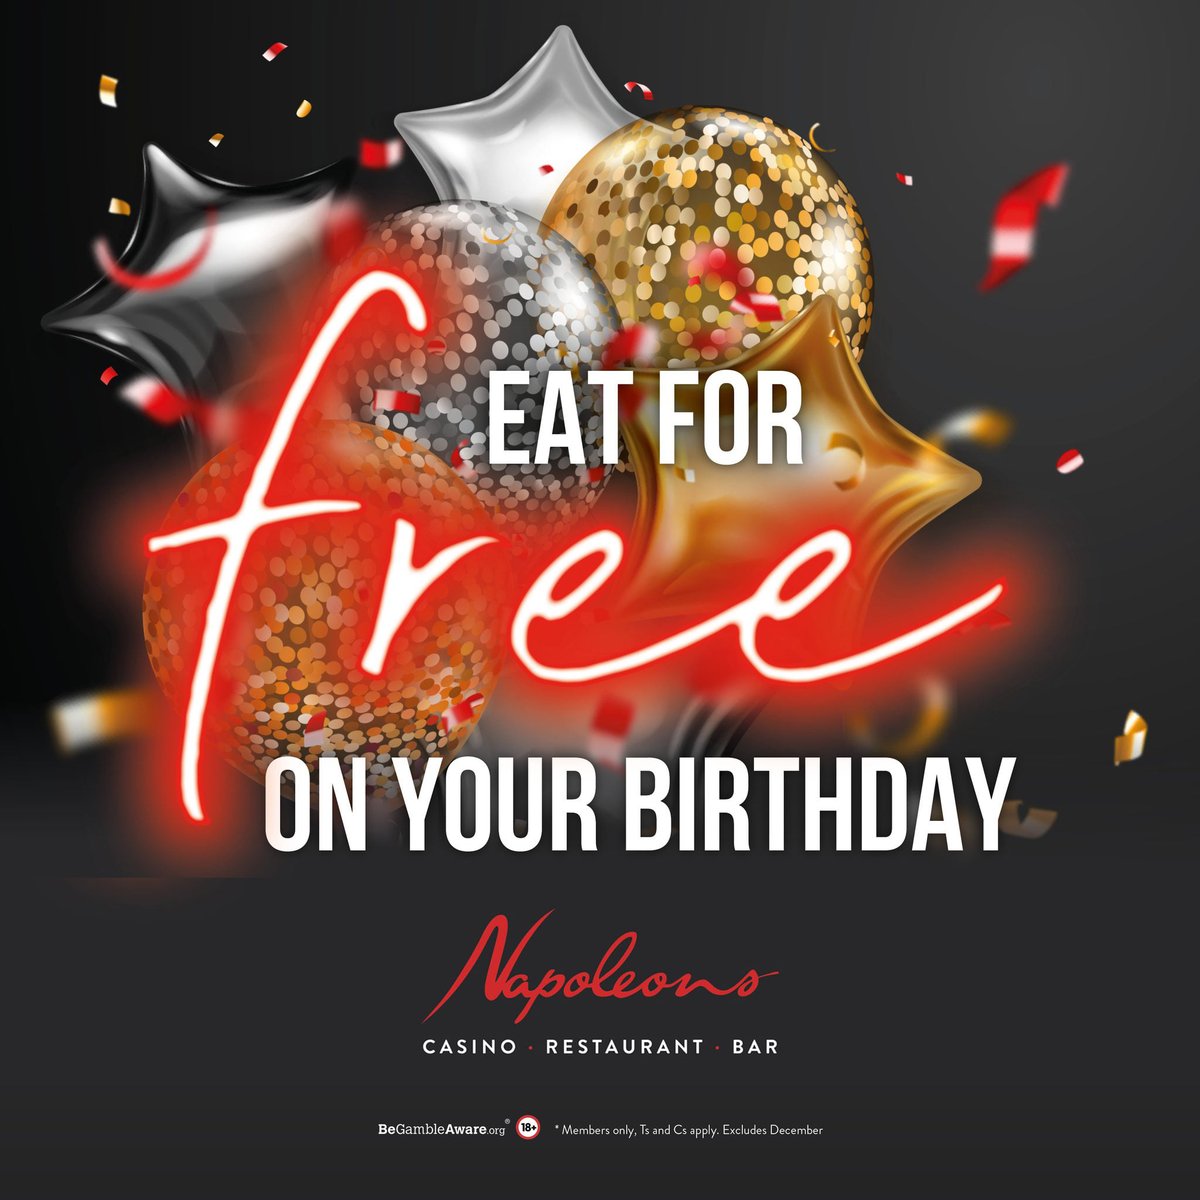 🥳 Is it your birthday month? Celebrate in style at Napoleons Casino and enjoy a FREE mouthwatering 3 course meal on us - inclusive of a drink and £5 bet! 👀 Reserve your table of 4 or more now: tinyurl.com/yrvbs52s 🎂